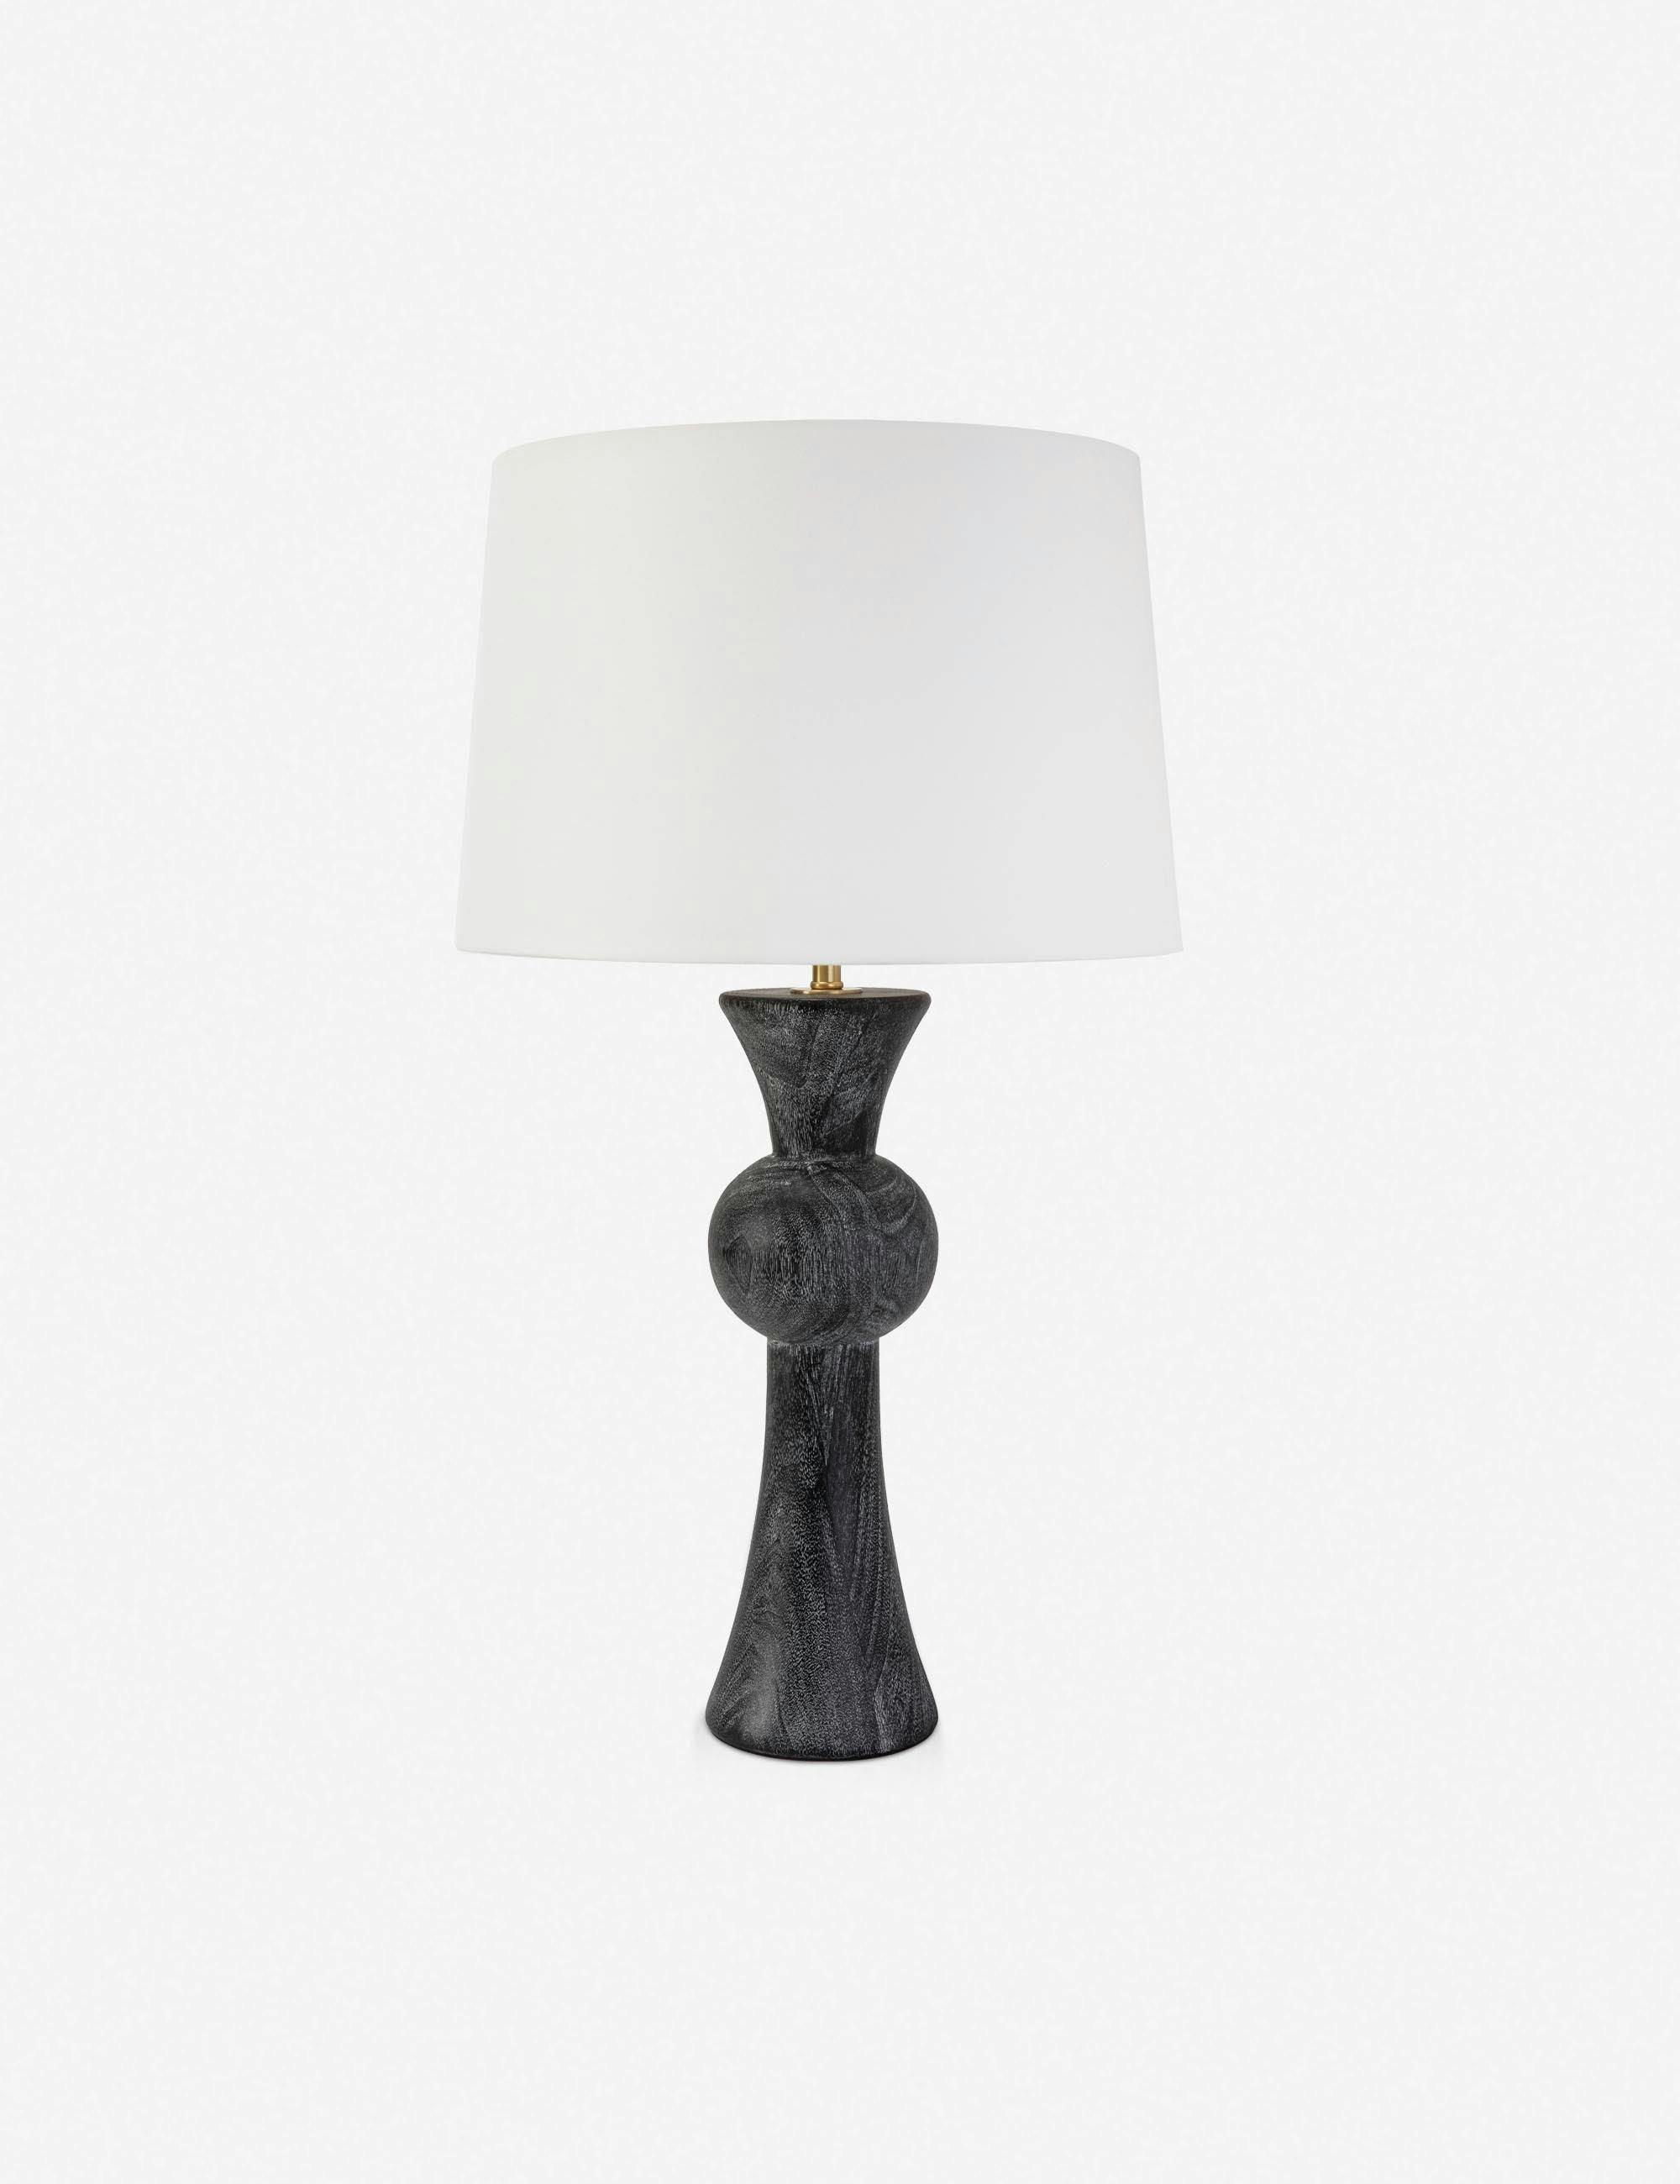 Vaughn Ebony Birch Wood Table Lamp with White Linen Shade